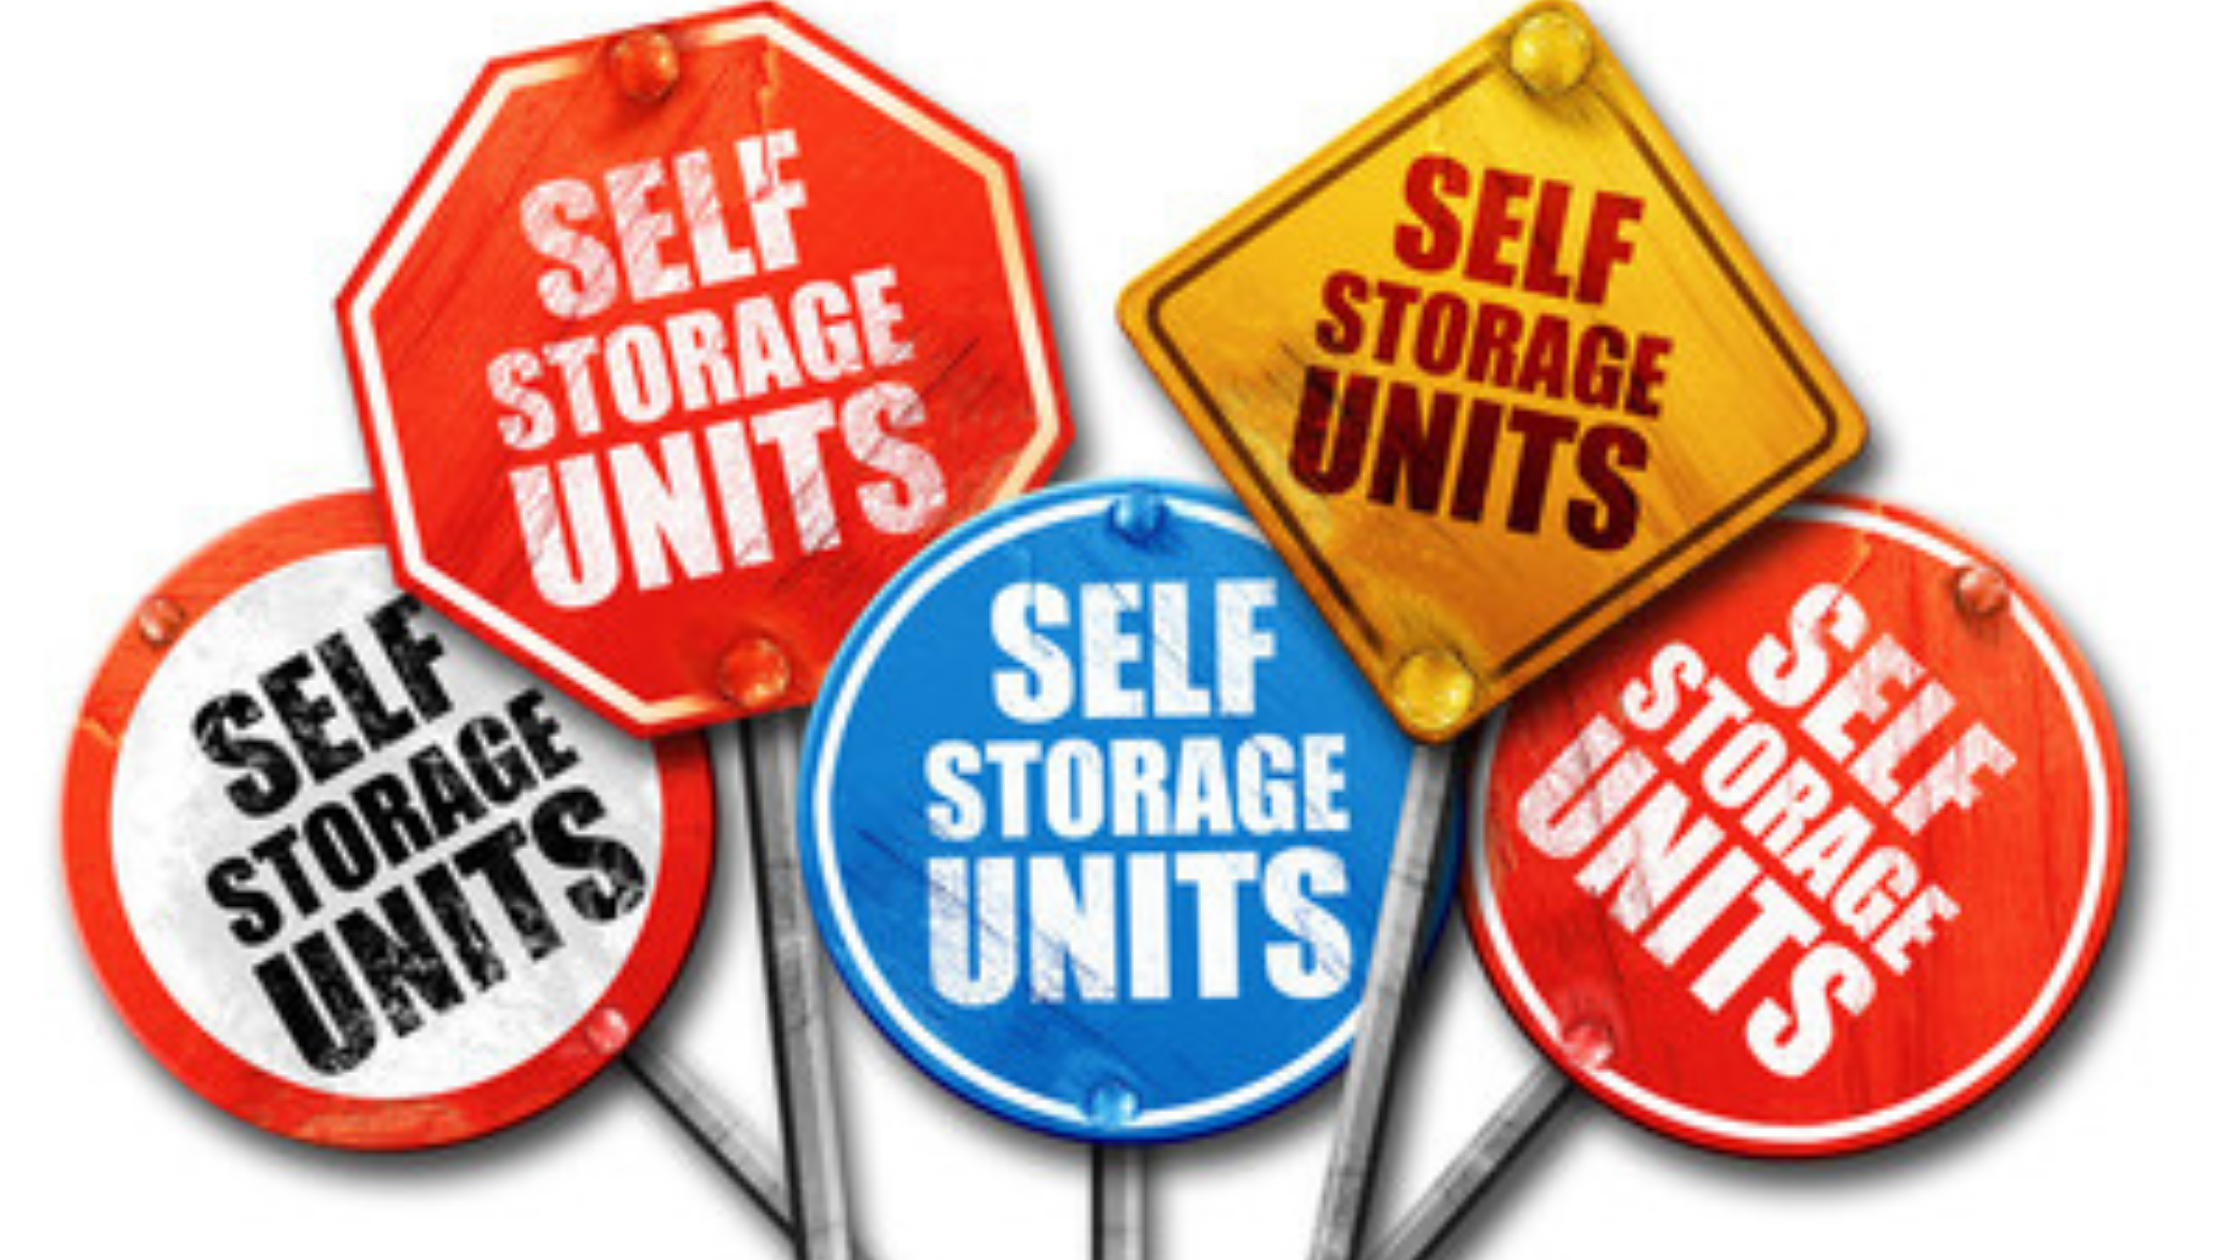 Graphic of signs that read "Self Storage Units".